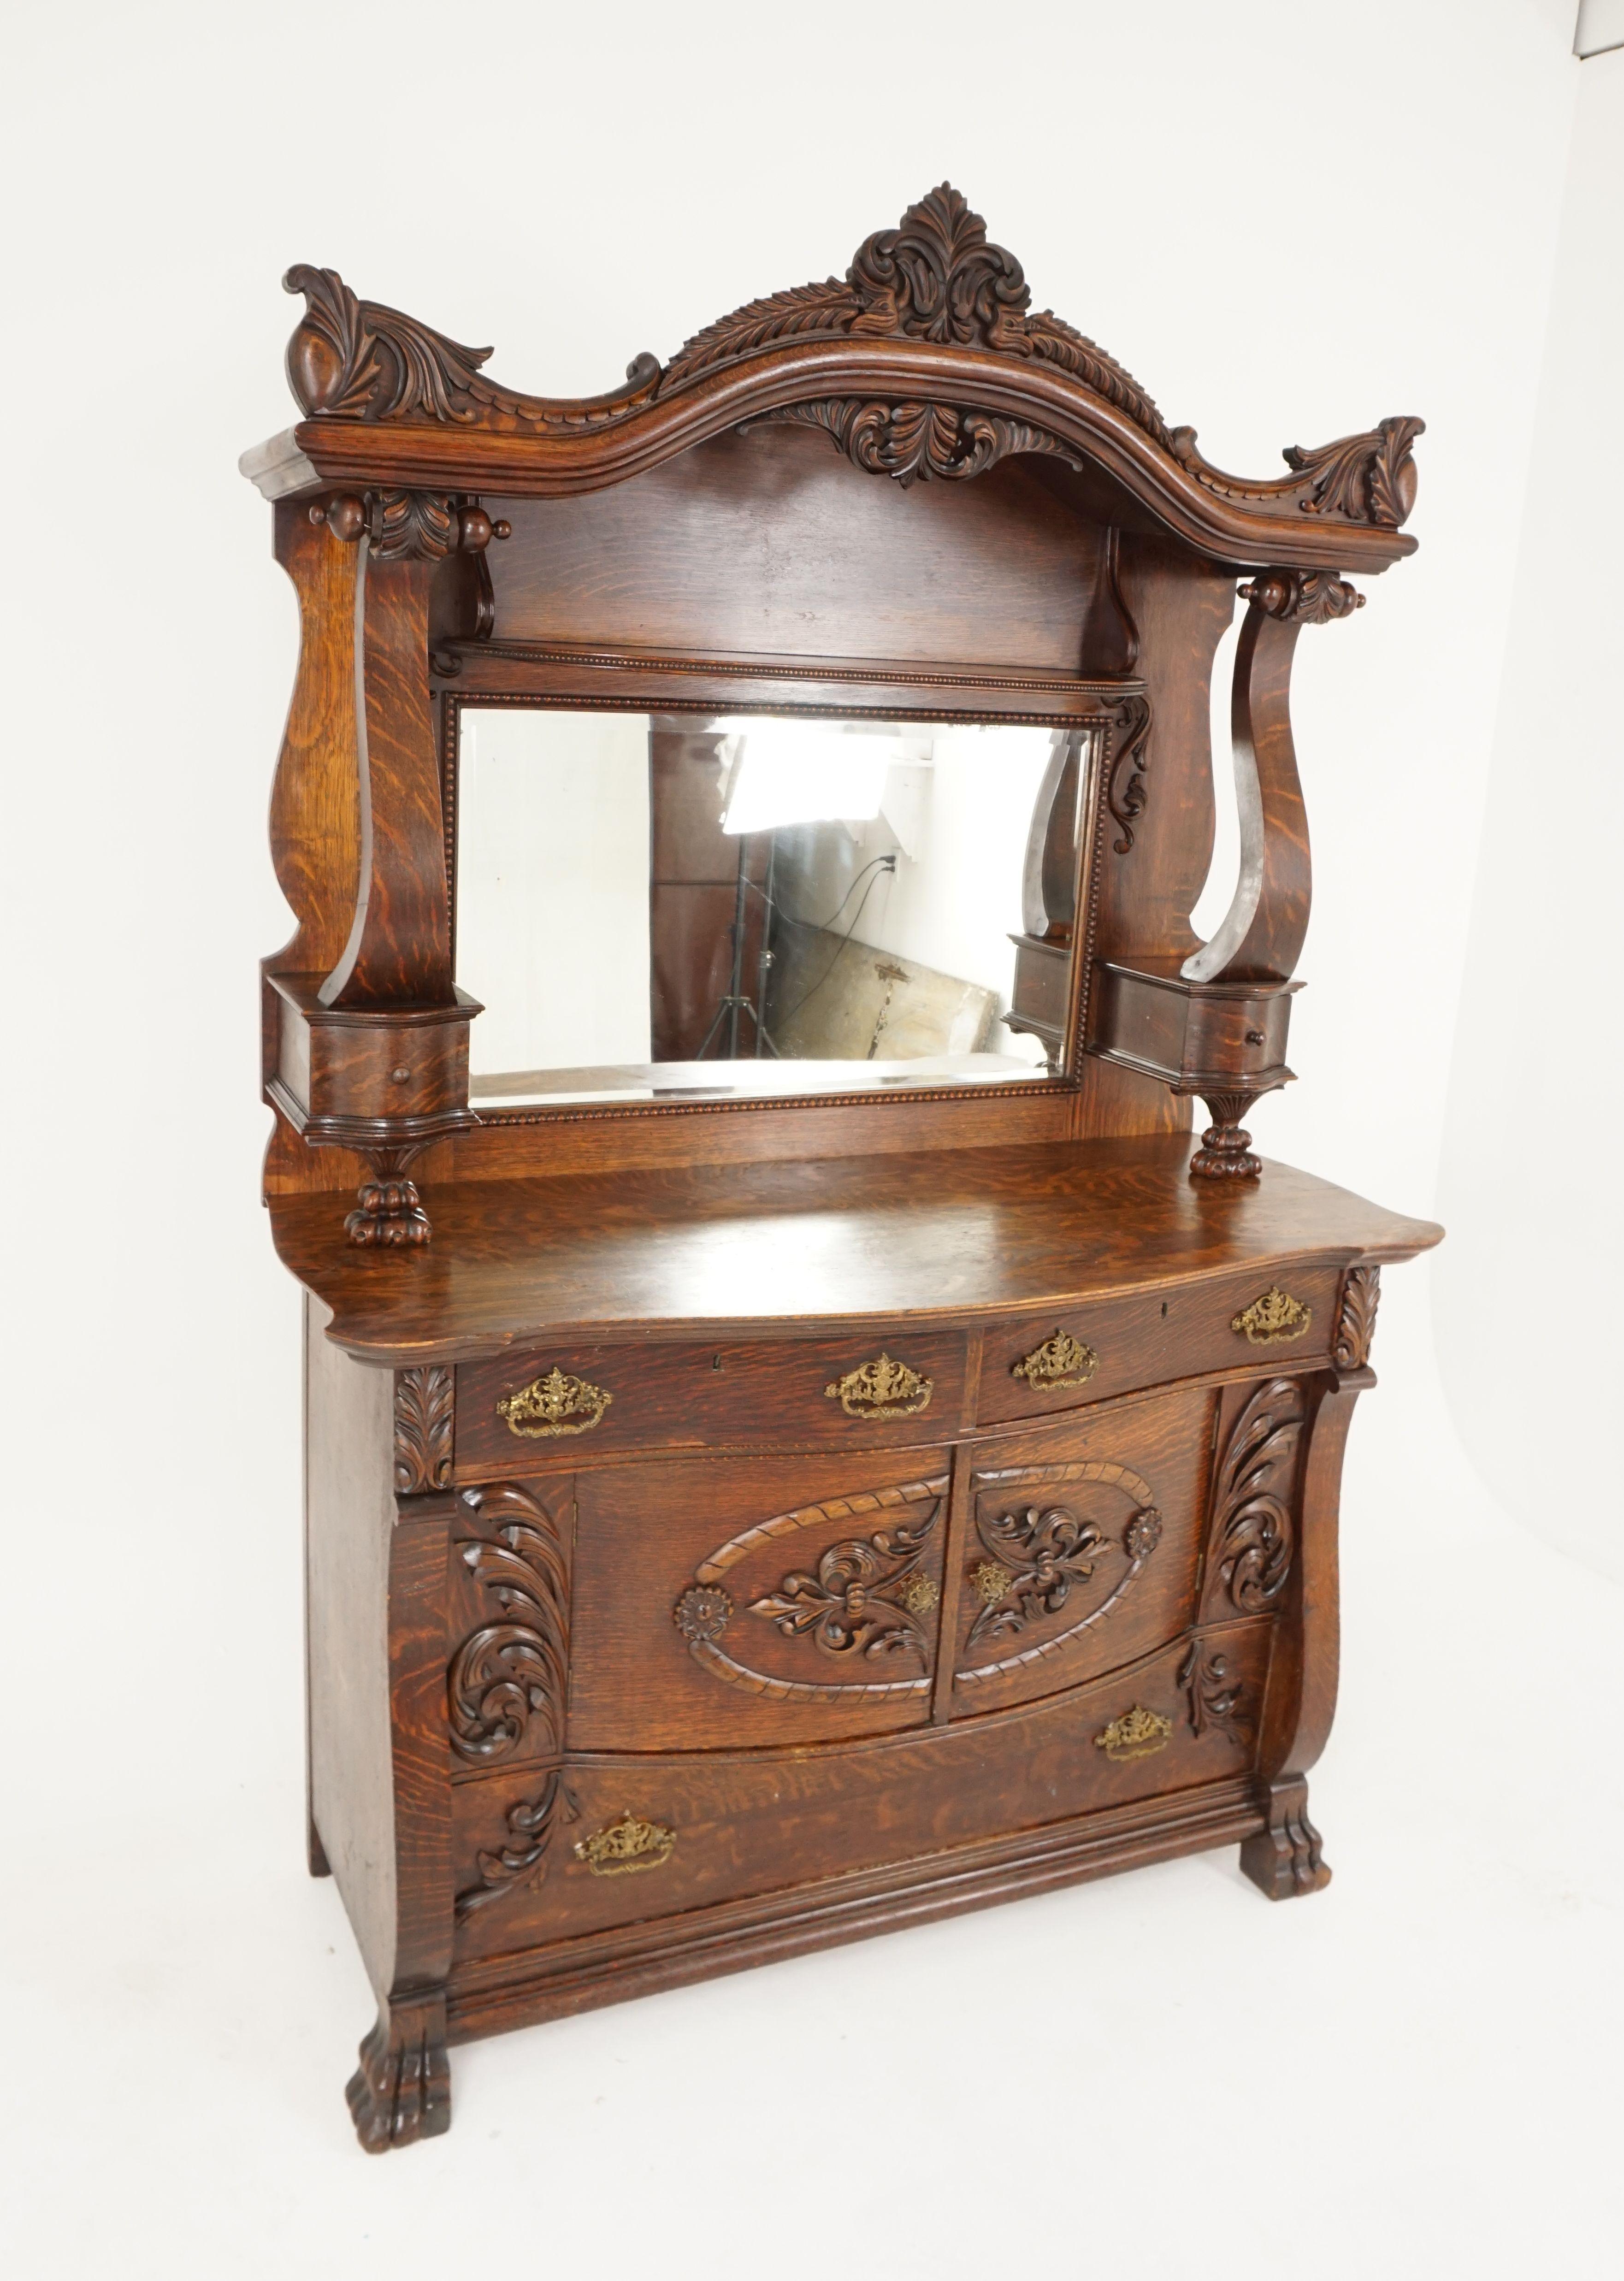 Antique oak sideboard, quarter sawn, mirror back, American 1910, B2483

American 1910
Solid oak
Original finish
Carved canopy on top with shaped underneath
Rectangular mirror with beading below
Pair of large shaped pillars with small drawer